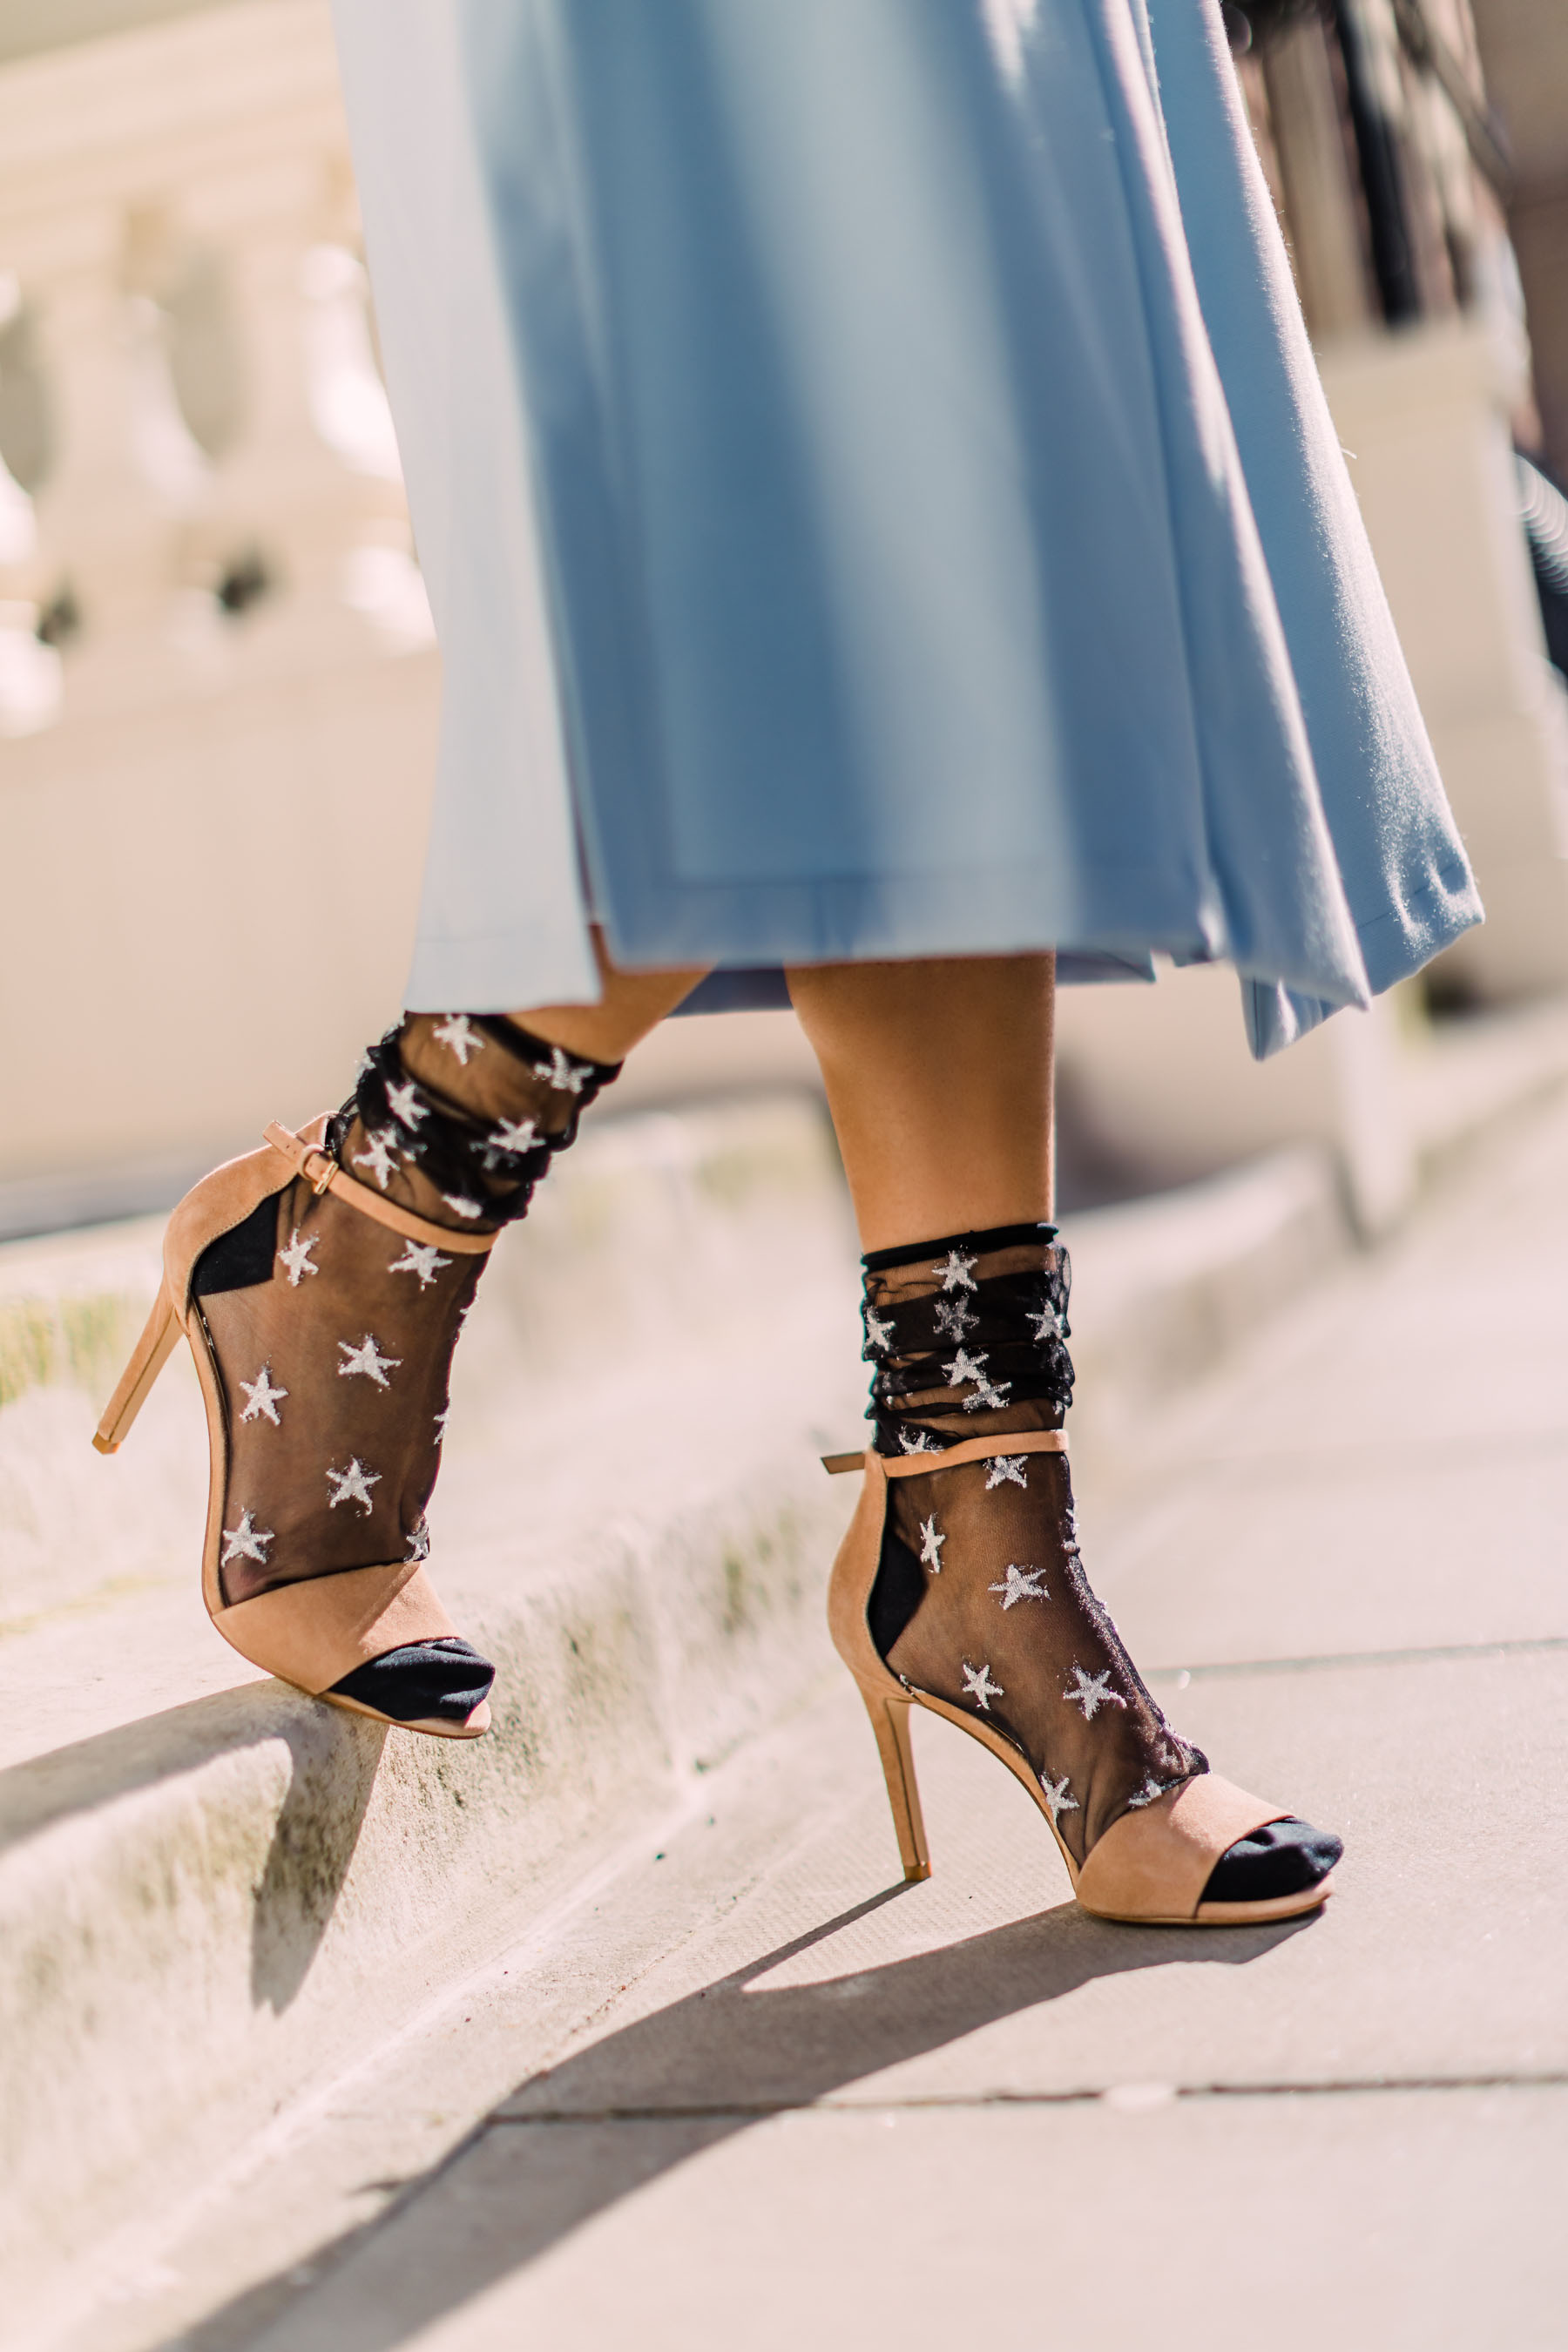 Accessory Trends - New Bags, Shoes, Jewelry | Trending accessories, Socks  and heels, Socks and sandals